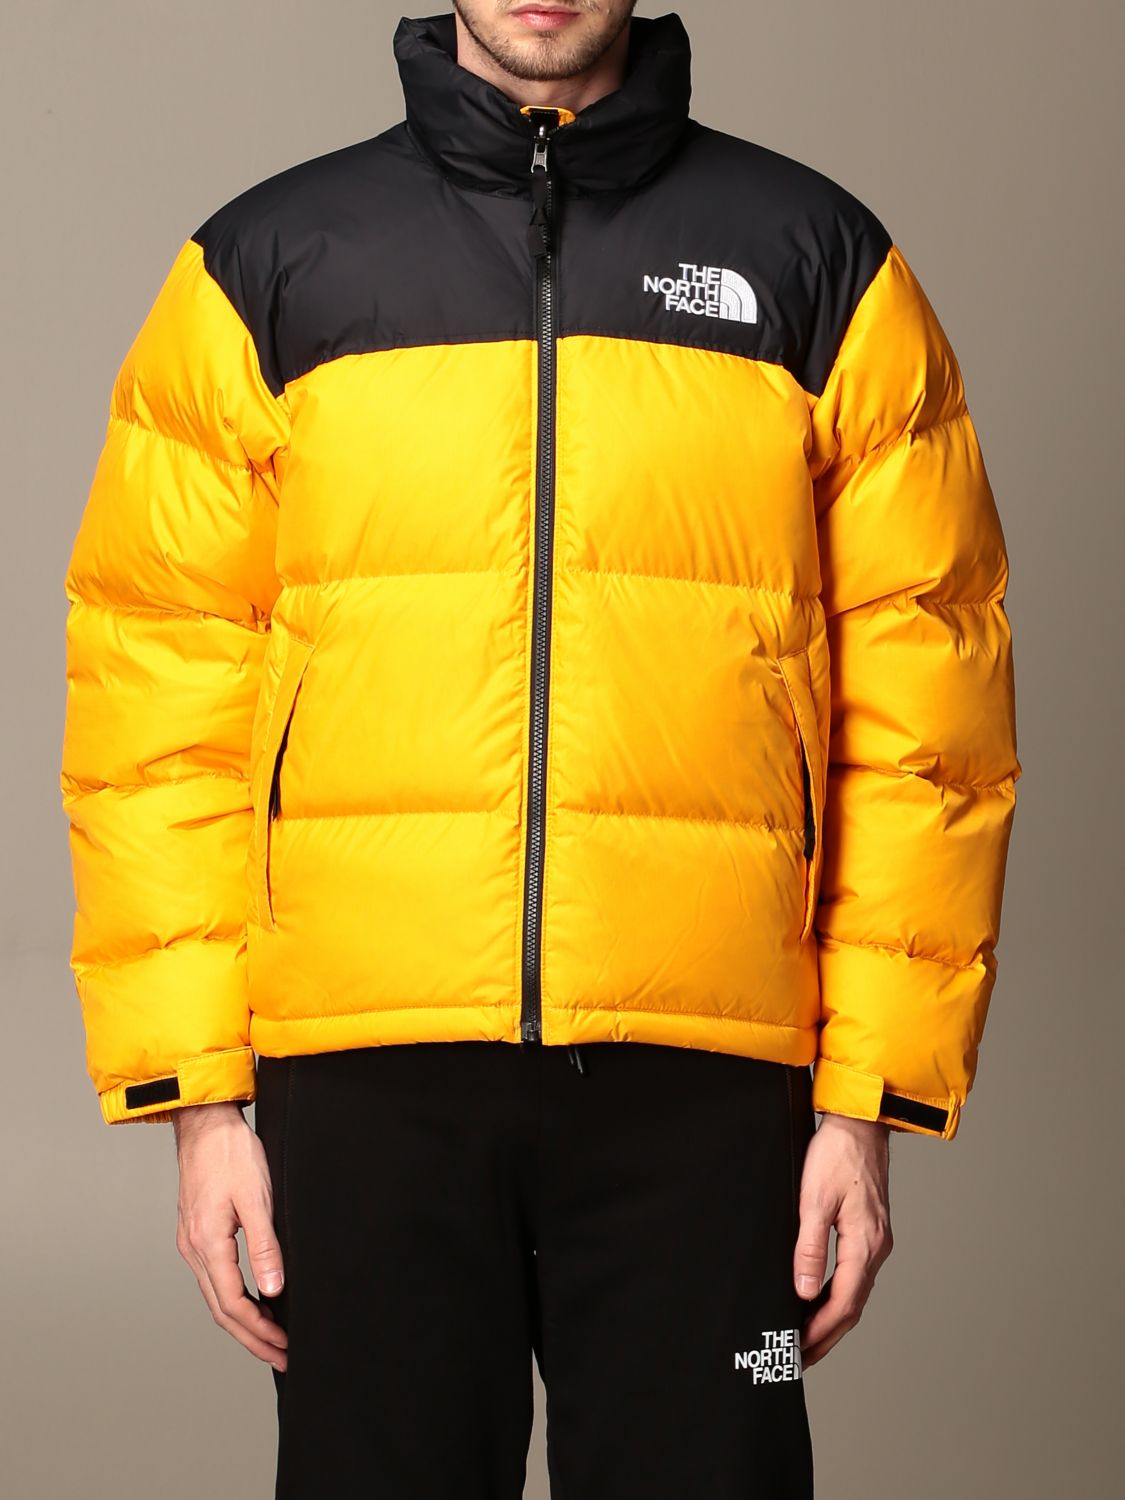 Jacket The North Face NF0A3C8D Giglio EN